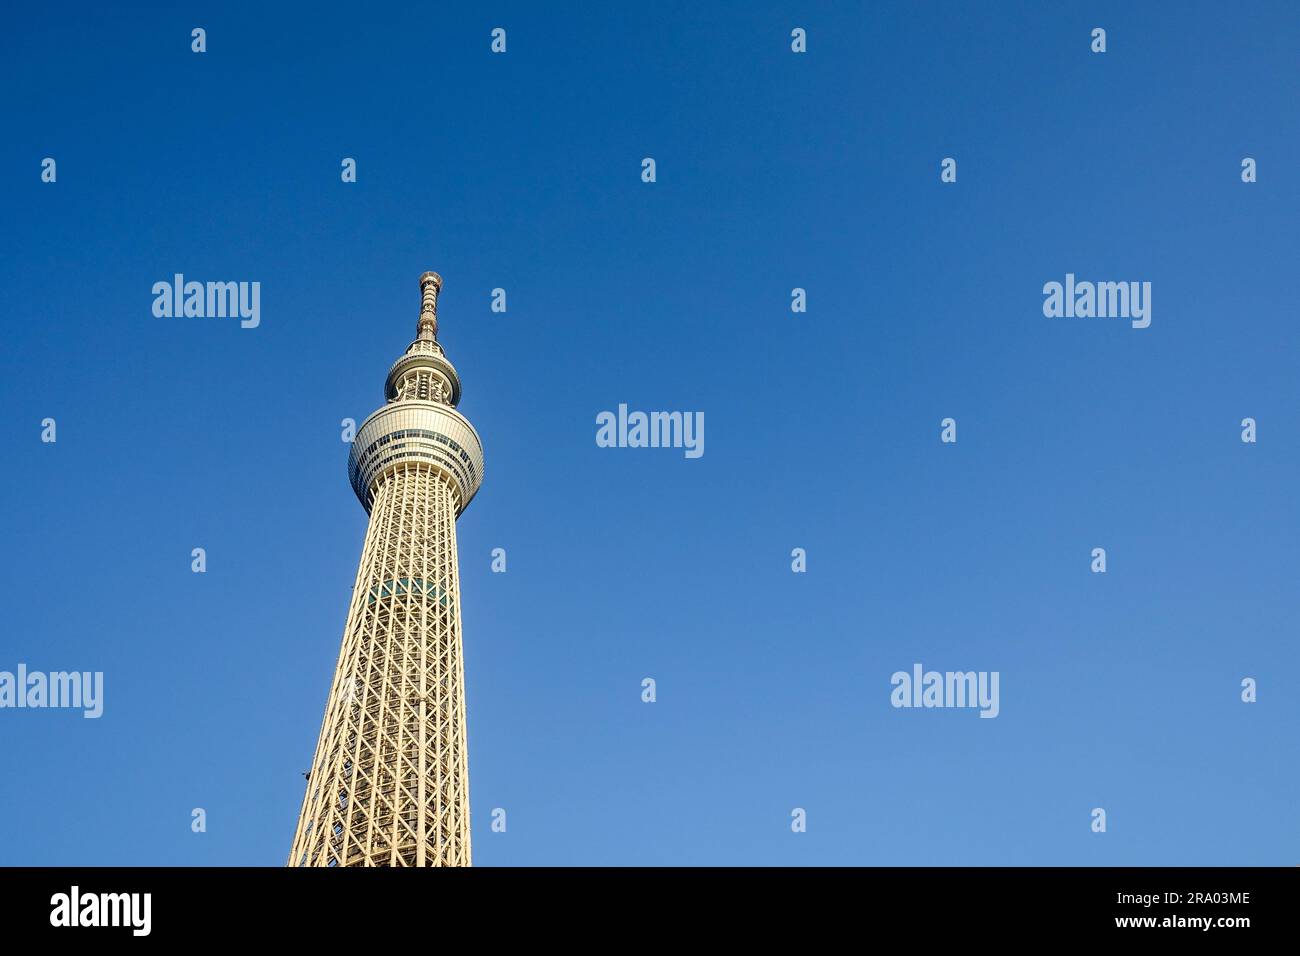 Tokyo Skytree tower (634 meters tall) with blue sky background as negative space Stock Photo